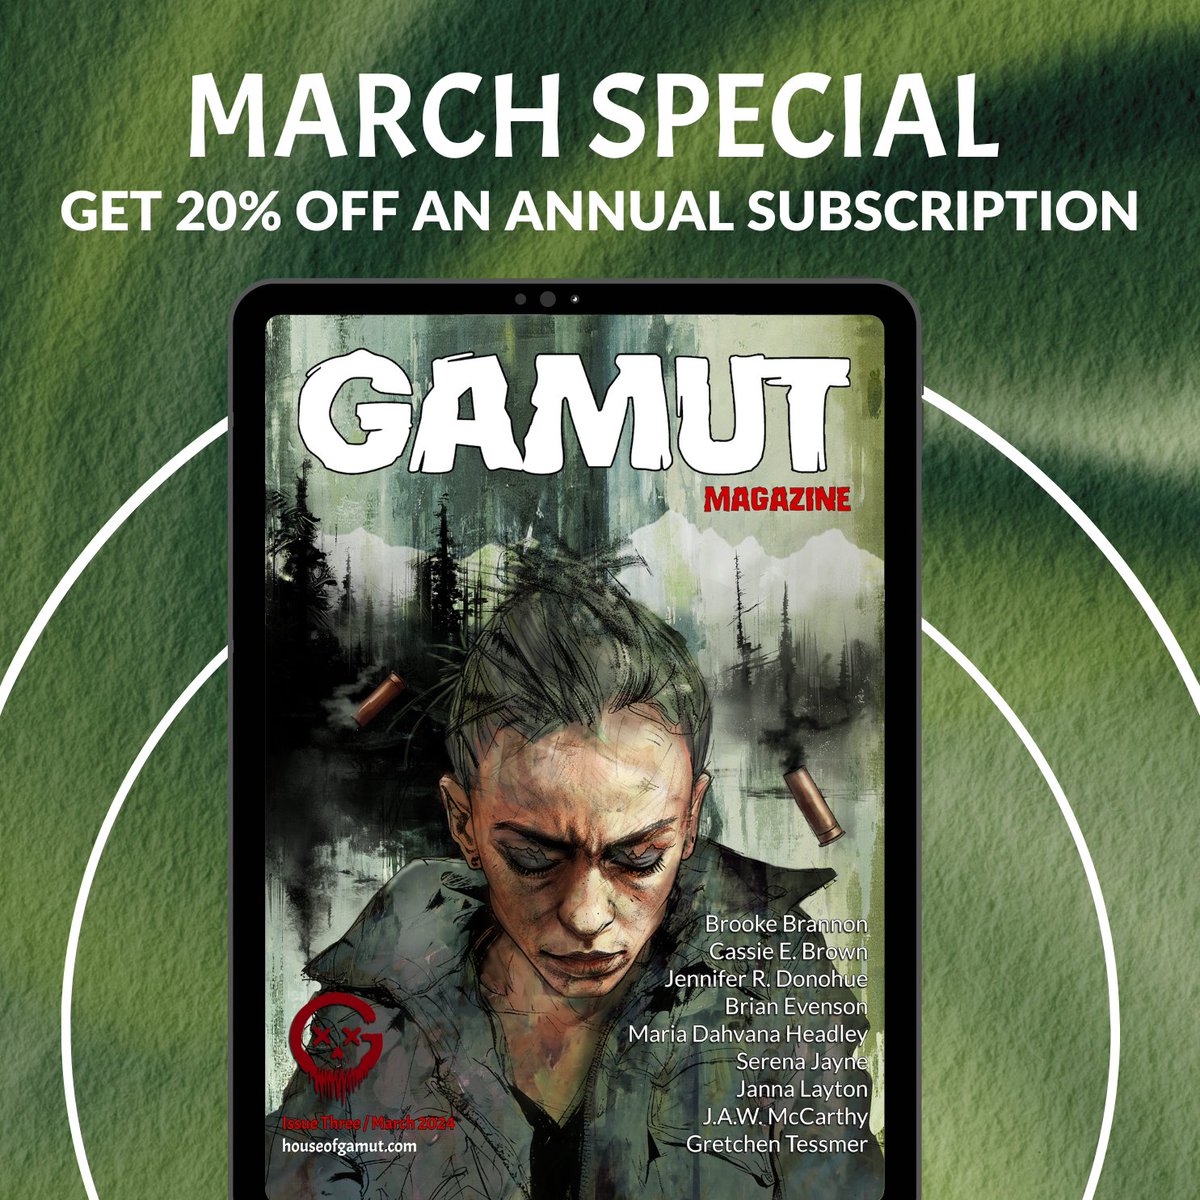 If you’re into DARK speculative fiction, poetry, and non-fiction in genres like horror, fantasy, sci-fi, and beyond…check out Gamut Magazine. This month only, you can save 20% OFF our annual magazine subscription so it’s only $36 for the entire year. Here’s how: 1️⃣ Sign up for…